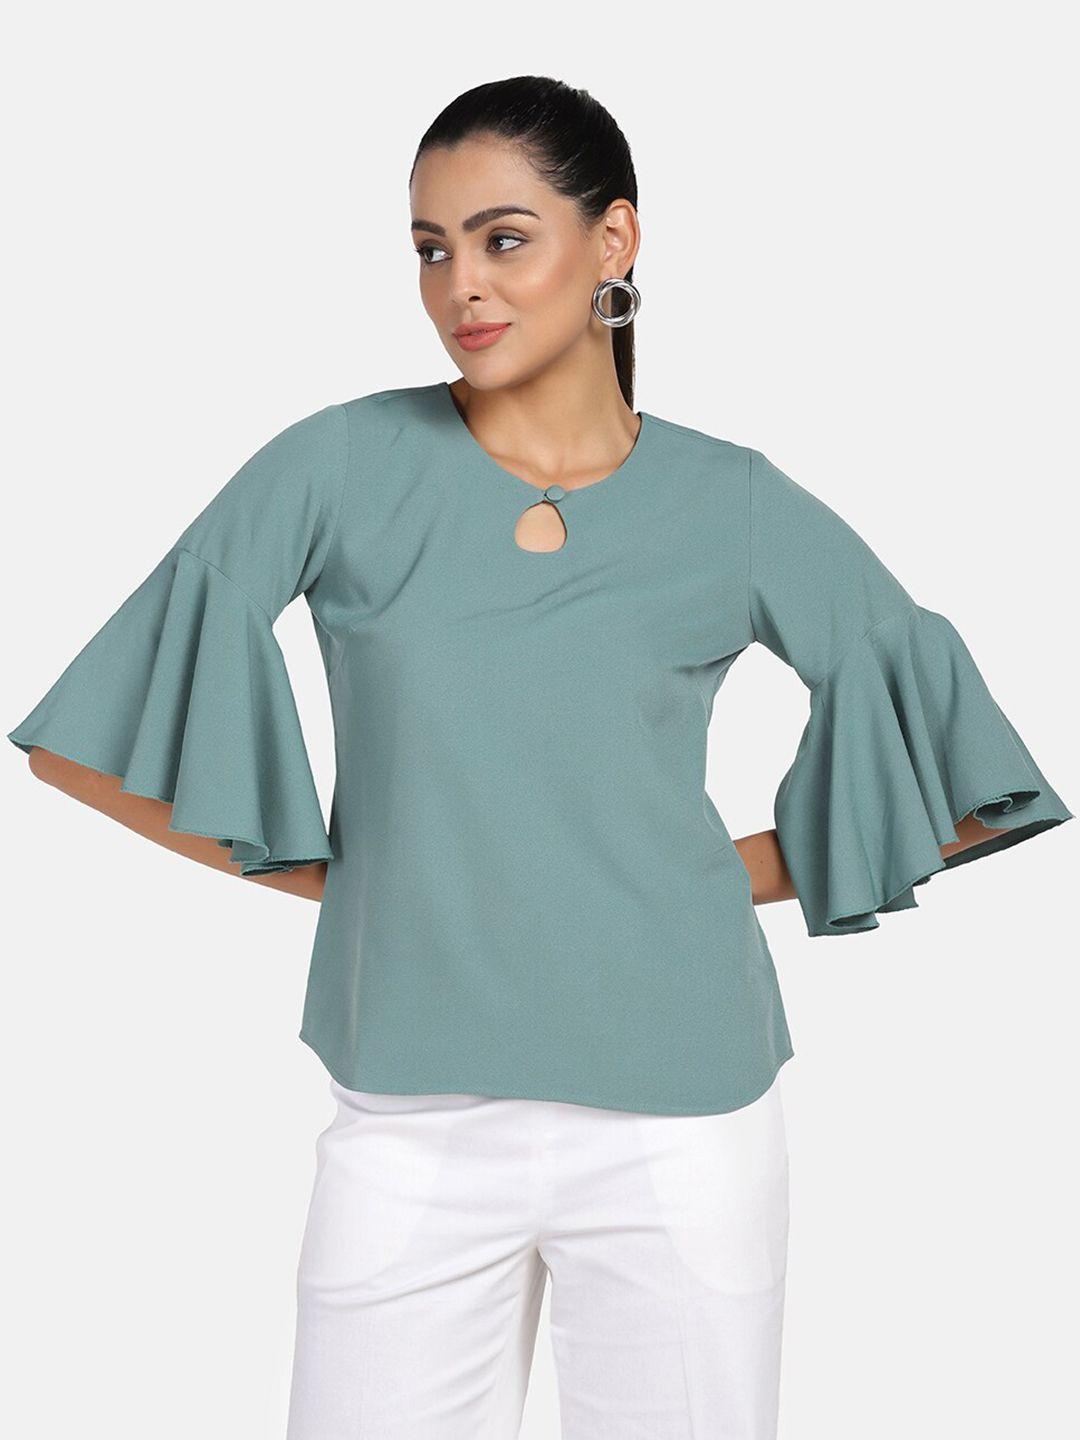 powersutra green solid crepe top